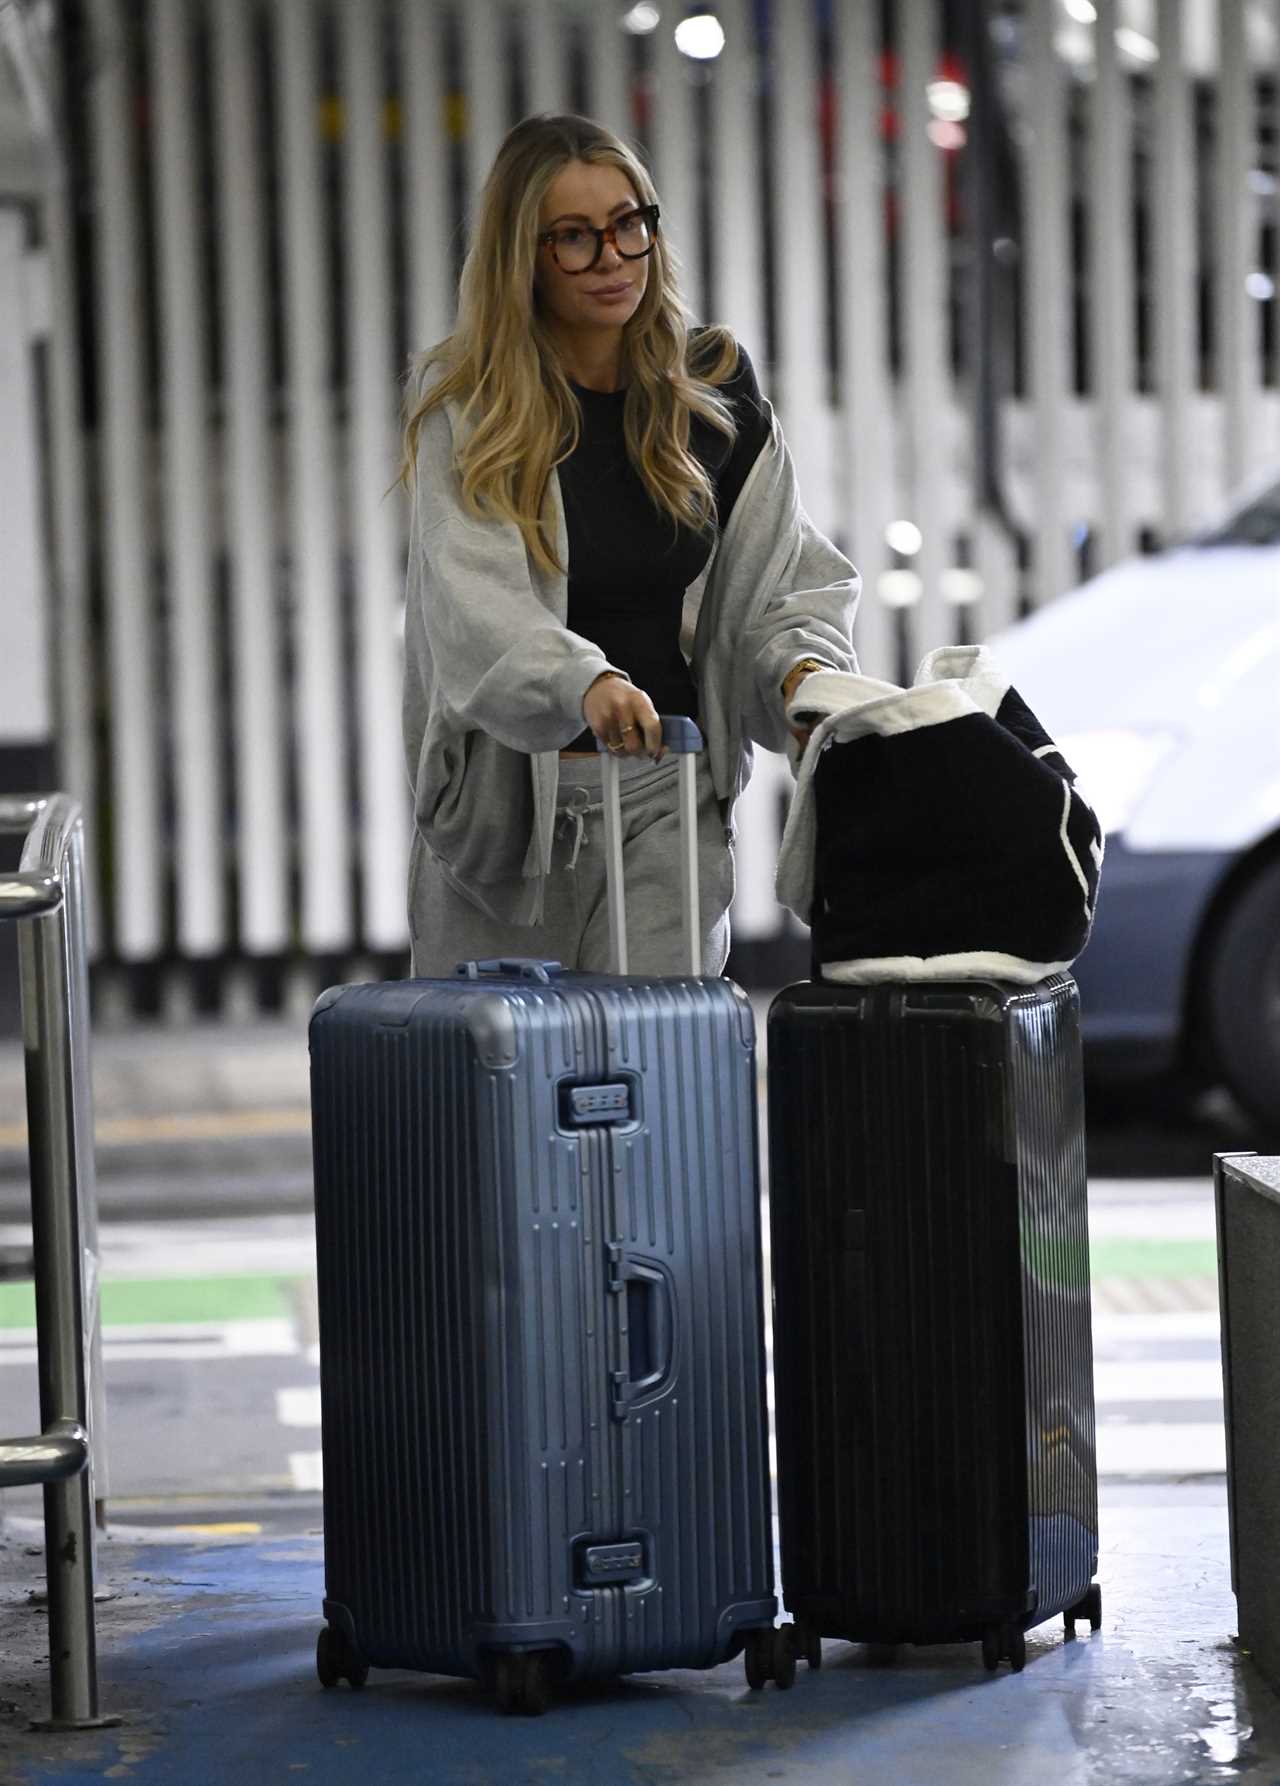 Olivia Attwood Spotted at Airport Amid I'm A Celeb Return Rumours After Landing New ITV Hosting Gig